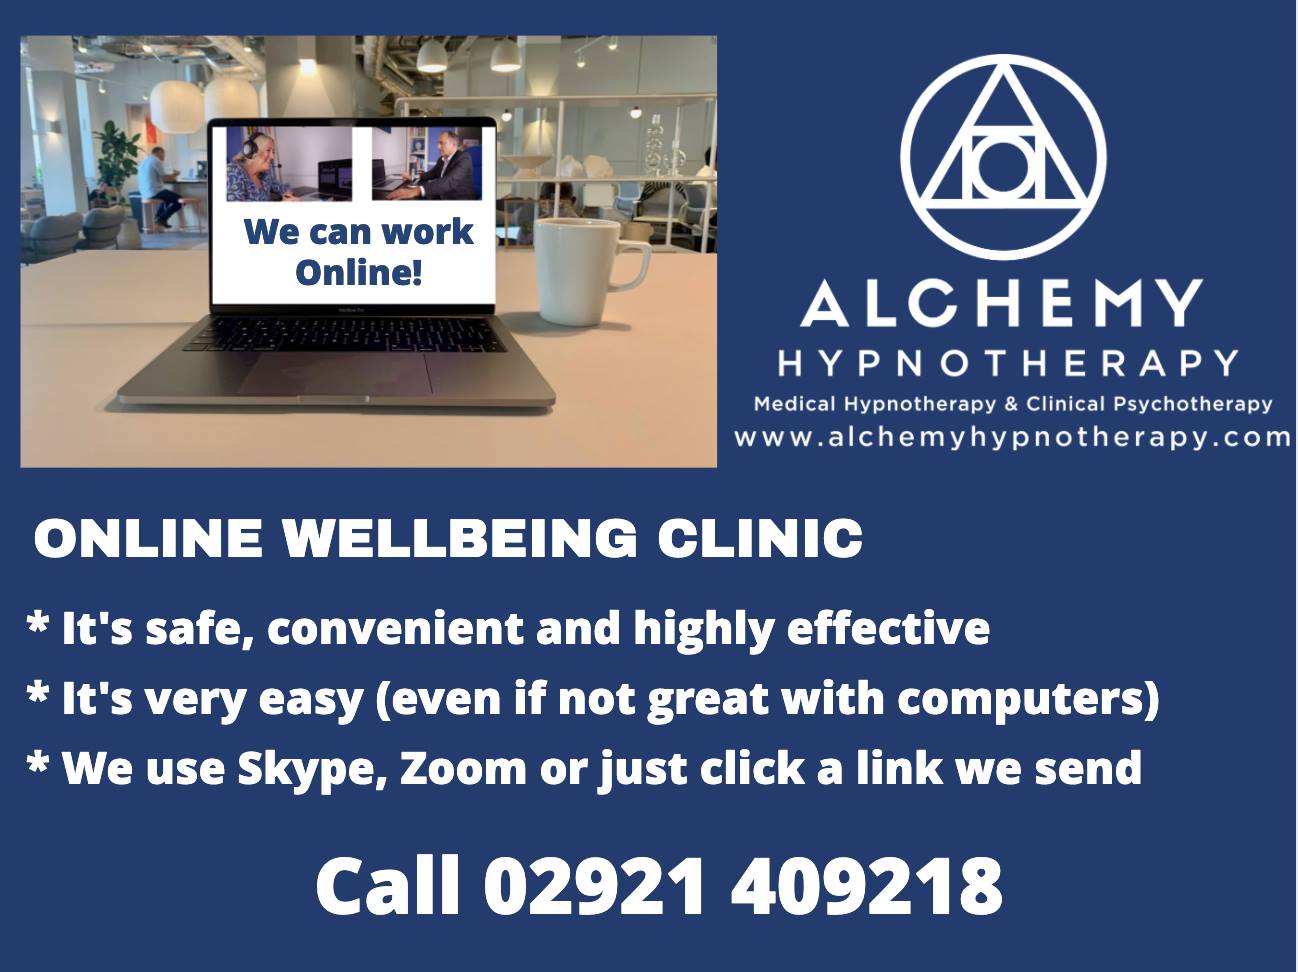 ONLINE WELLBEING CLINIC